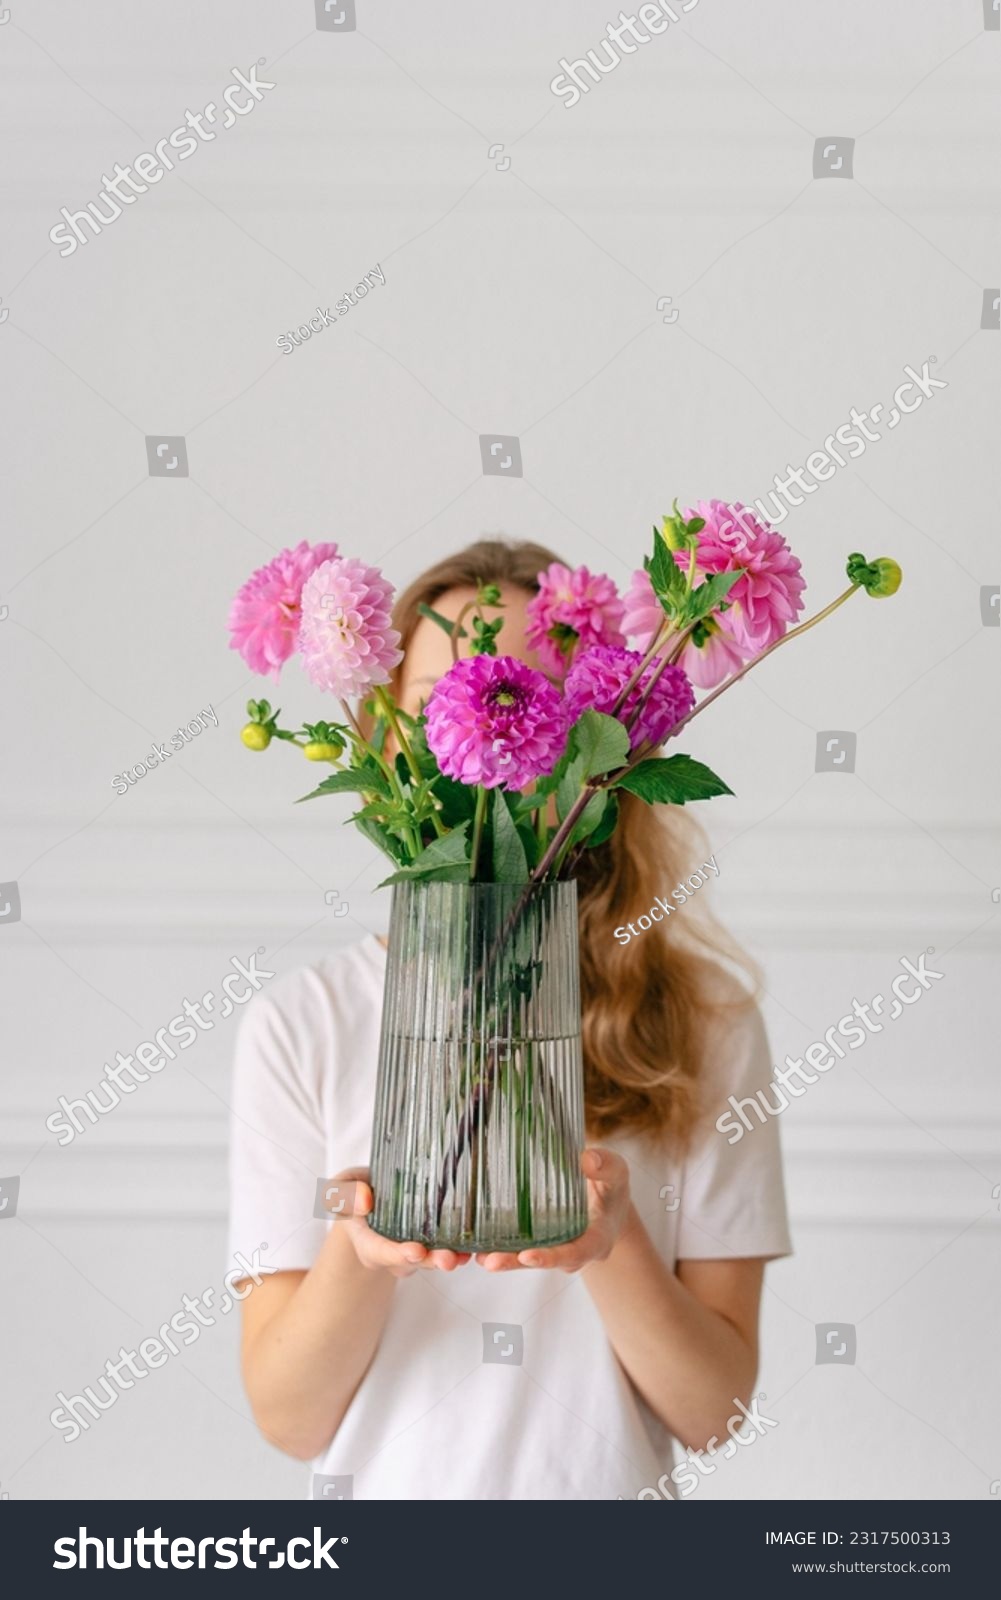 Vertical image of a young woman holding a bouquet of pink dahlias in a vase in front of her on a white background. The concept of flower workshops and articles for the study of floristry #2317500313